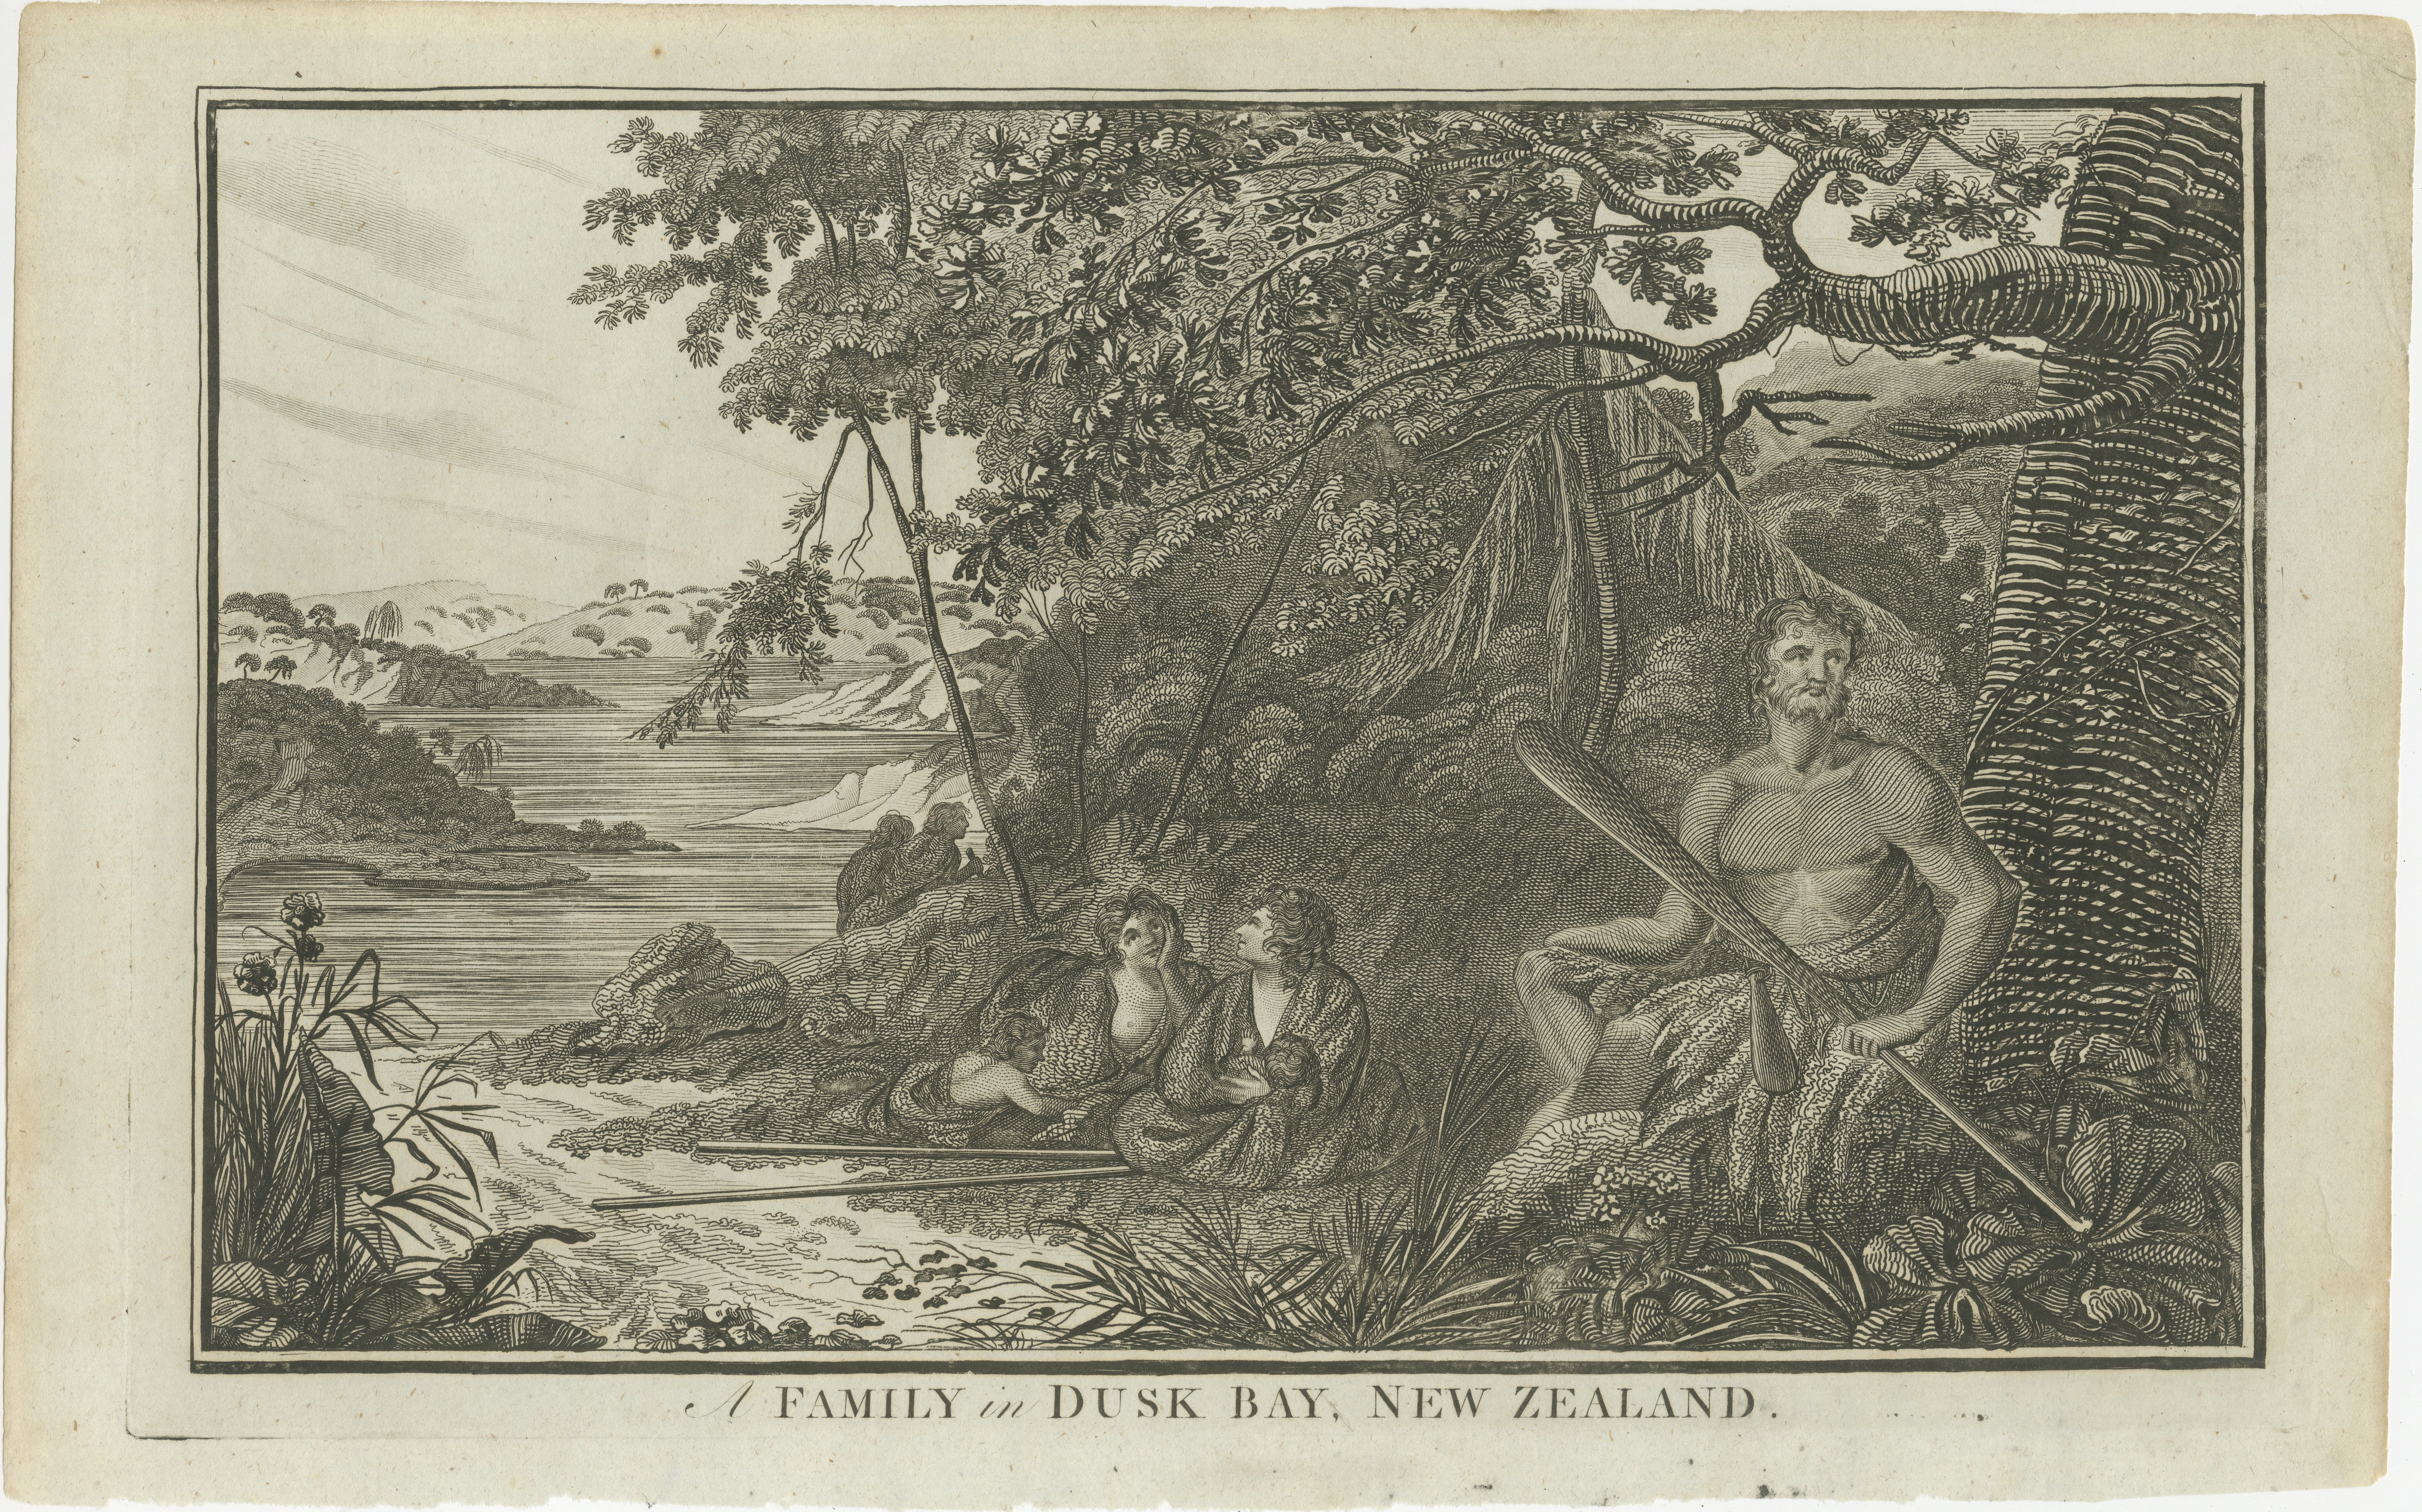 The image is an 18th-century engraving showing a family in Dusky Bay, New Zealand. It depicts a tranquil scene with three individuals, presumably a family, in a coastal forest setting. The man is sitting on the ground, holding what appears to be a